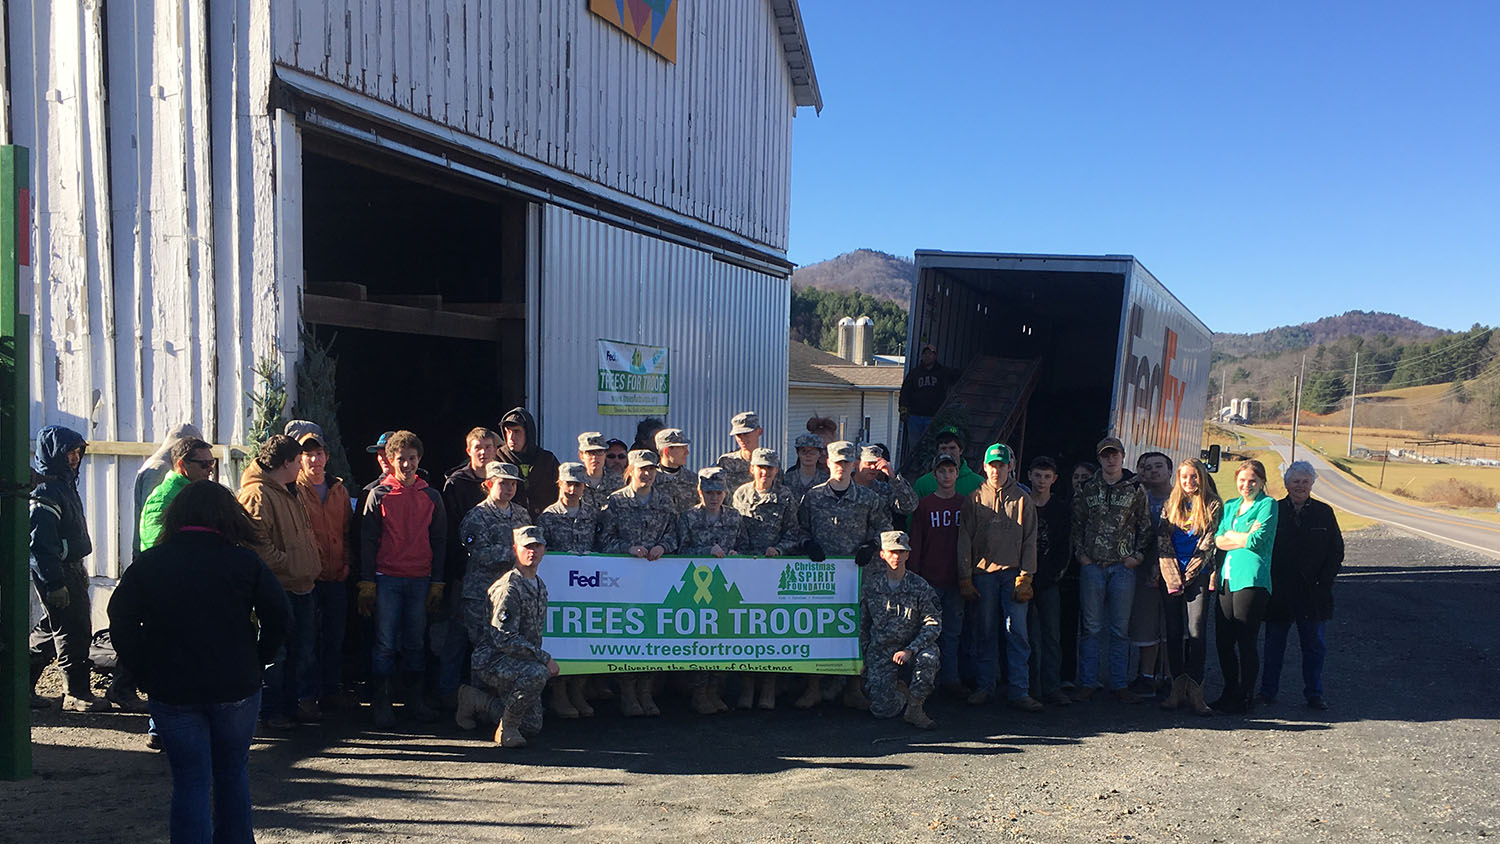 A group photo of ROTC cadets after loading a truck full of Christmas Trees for military bases across the country.